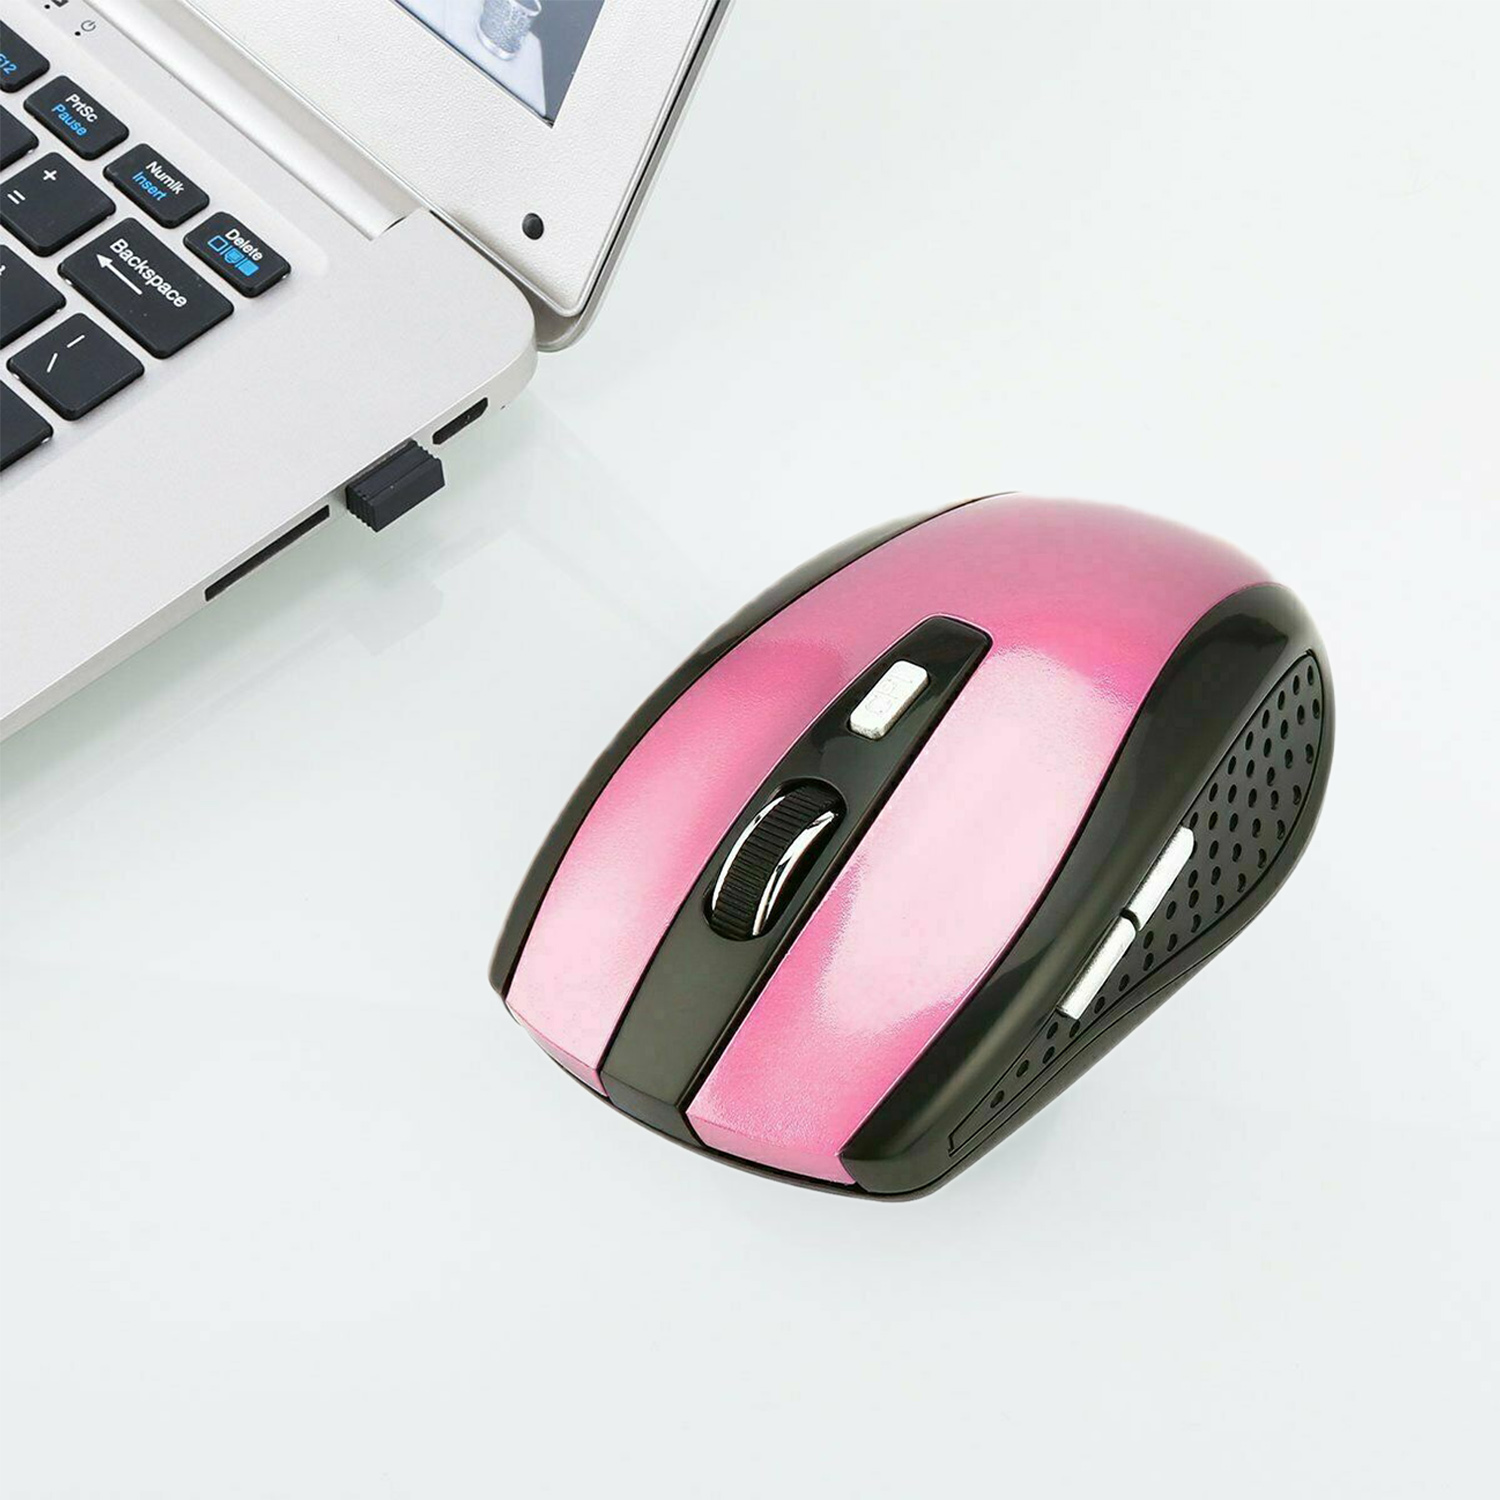 2Pcs Wireless Optical Pink Mouse Mice & USB Receiver For PC Laptop Computer DPI Black - image 2 of 7